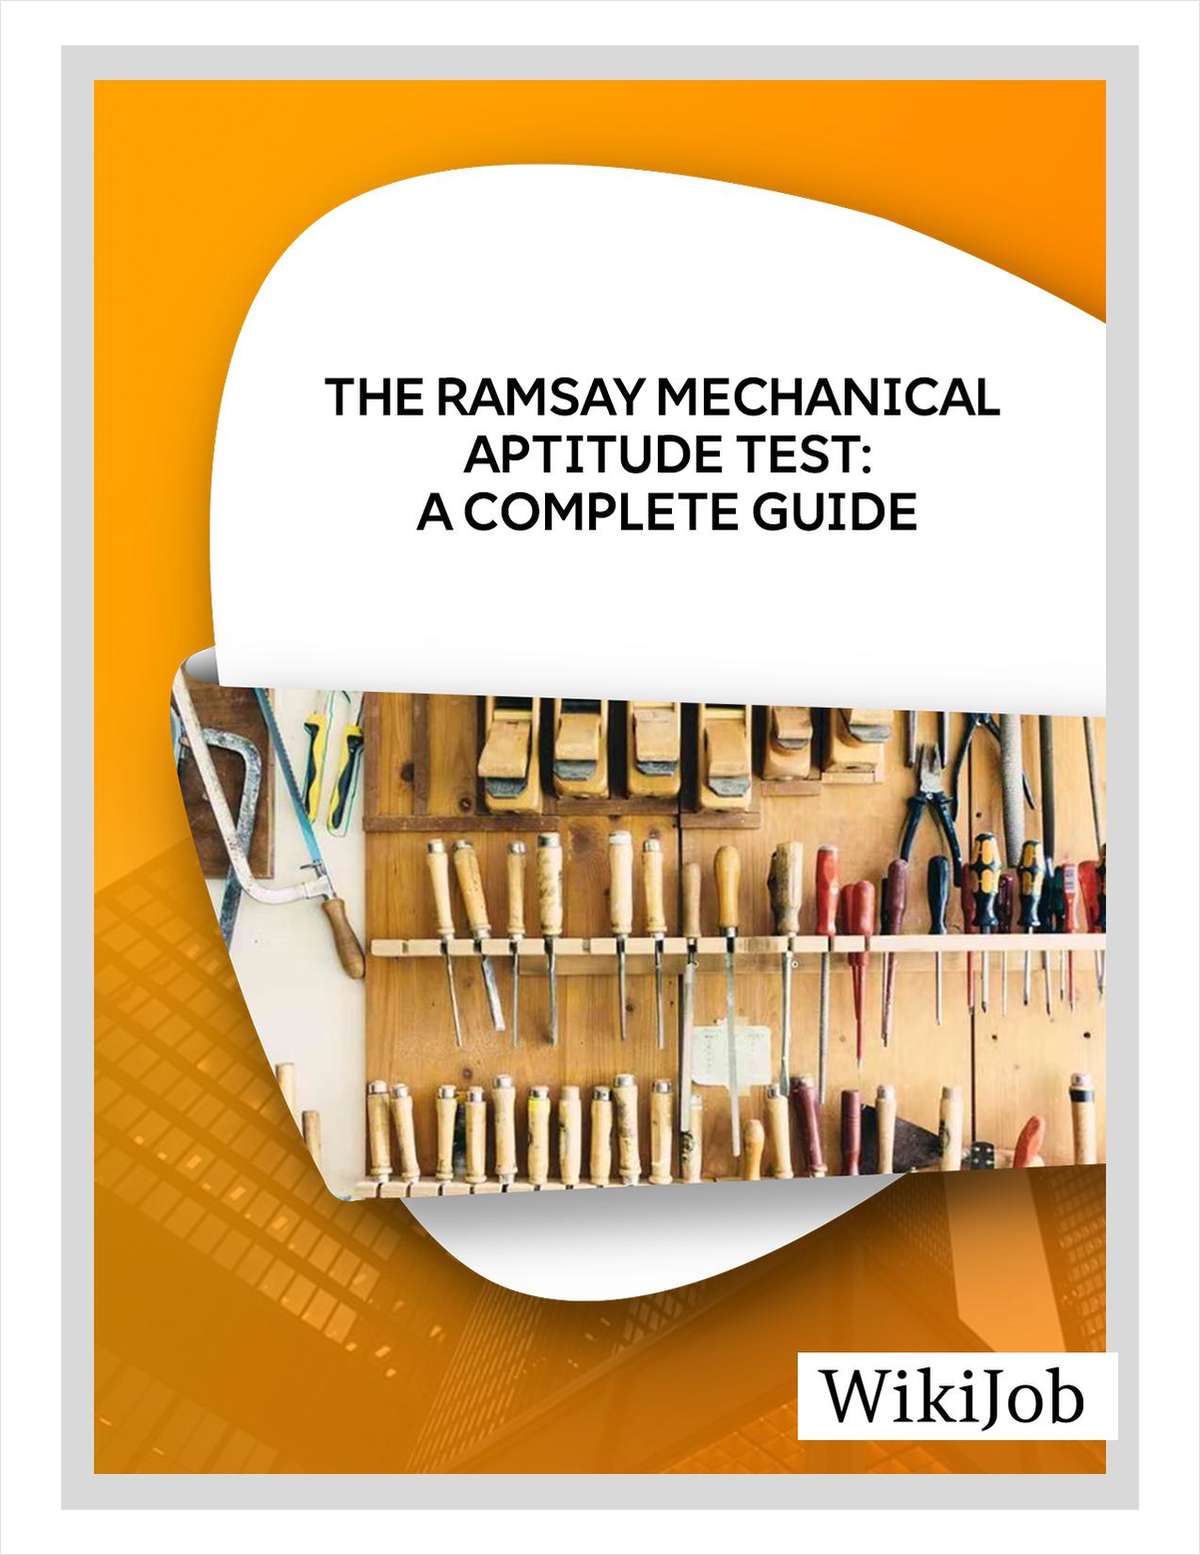 The Ramsay Mechanical Aptitude Test: A Complete Guide